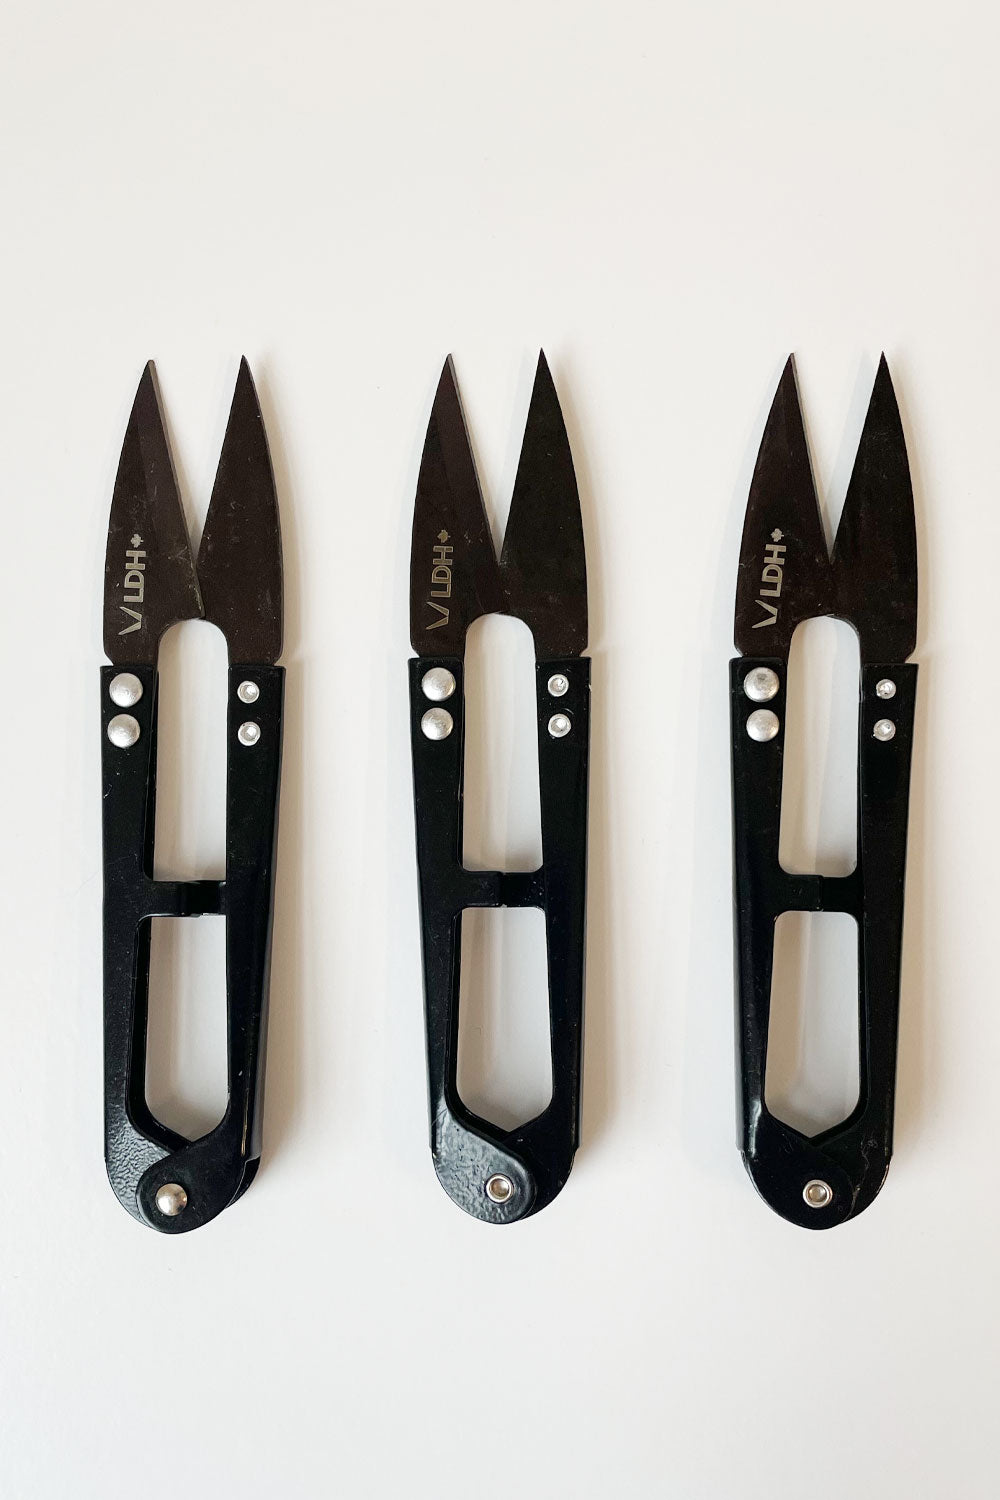 3 thread snips aligned vertically. The handles are slightly shiny and black; the blades are dark grey. LDH logo on the left blade. 